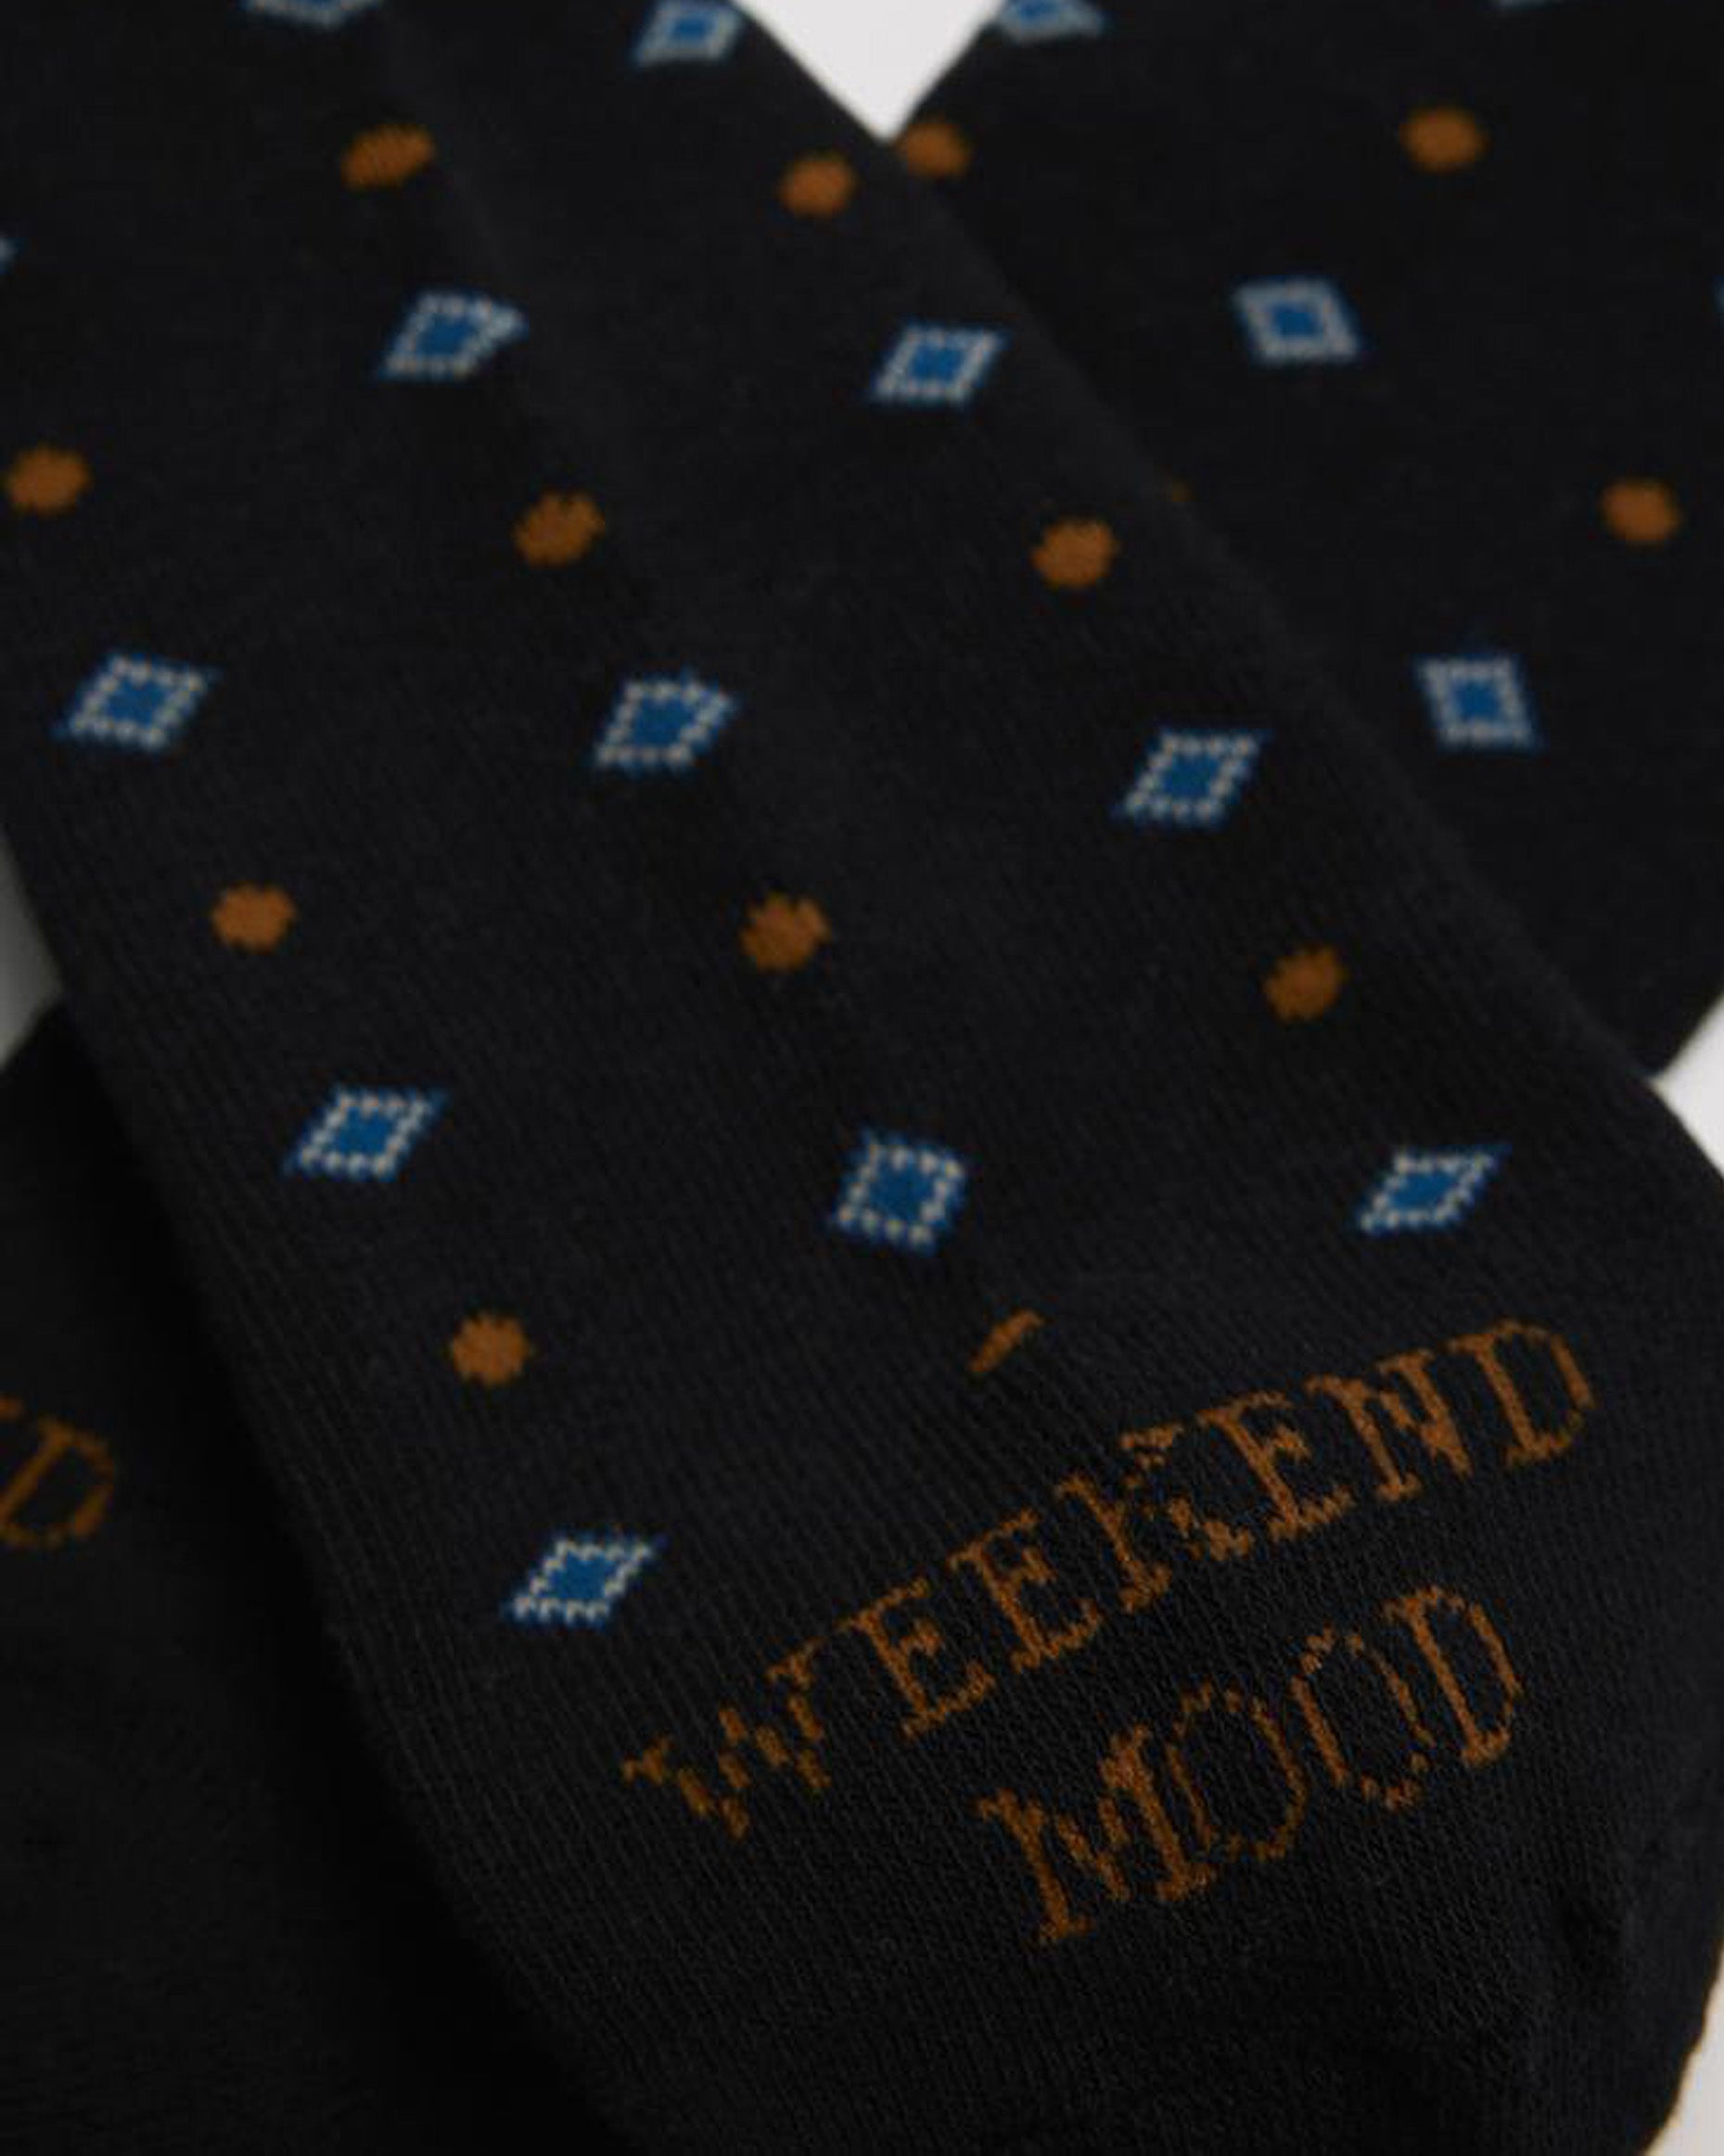 Ysabel Mora 22883 Weekend Mood Socks - Thick and warm black terry lined cotton mix crew length ankle socks with a spot and diamond pattern in rust and blue with the text "weekend mood" on the toe